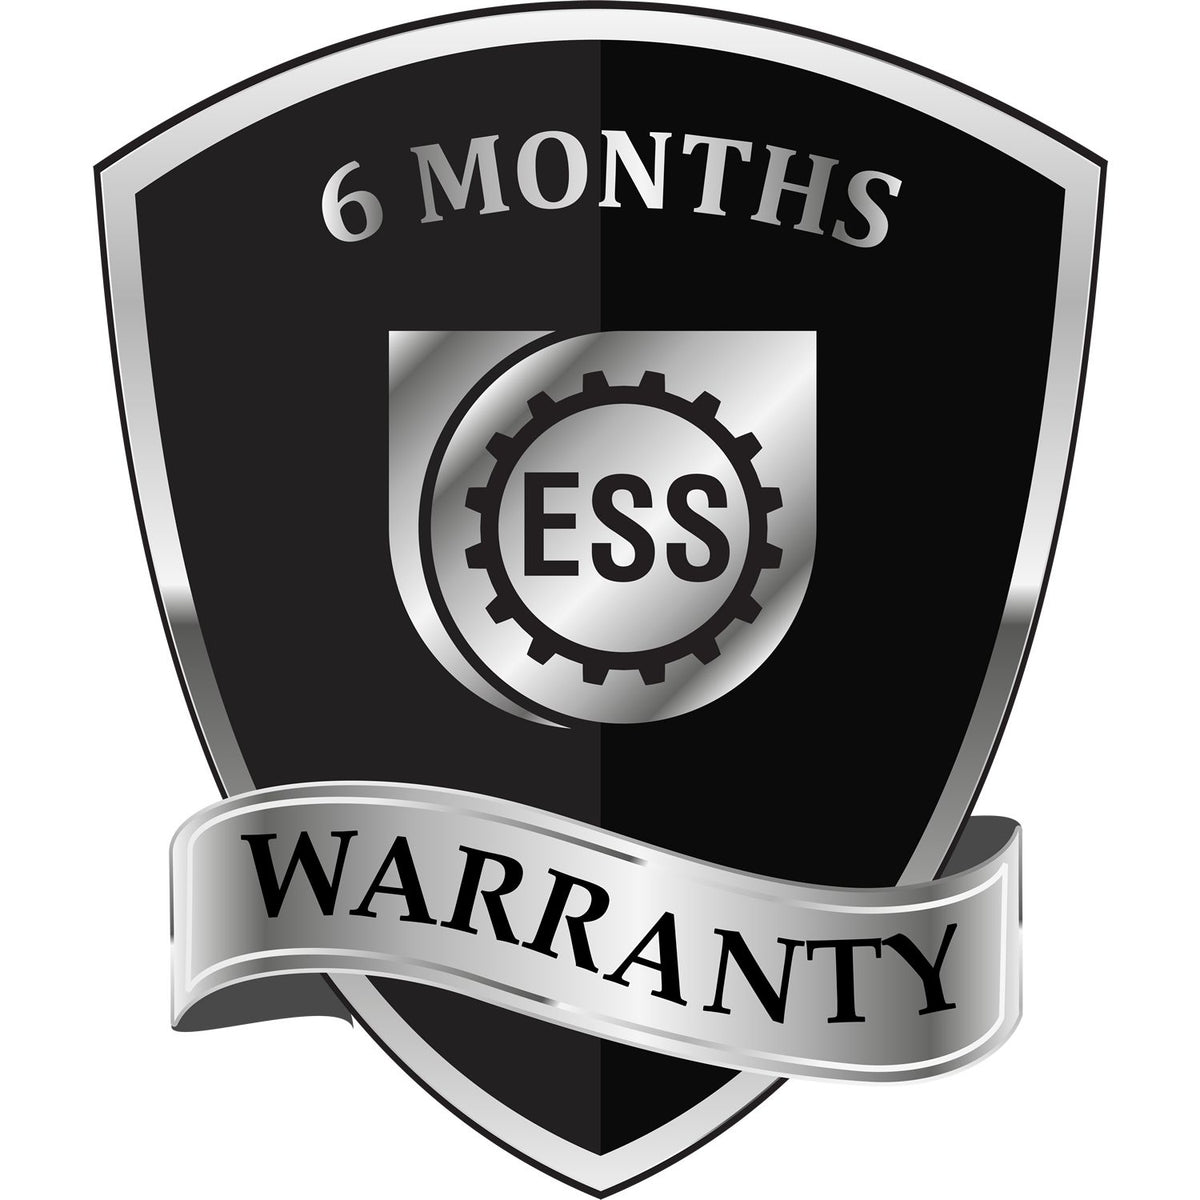 A badge or emblem showing a warranty icon for the Delaware Professional Engineer Seal Stamp